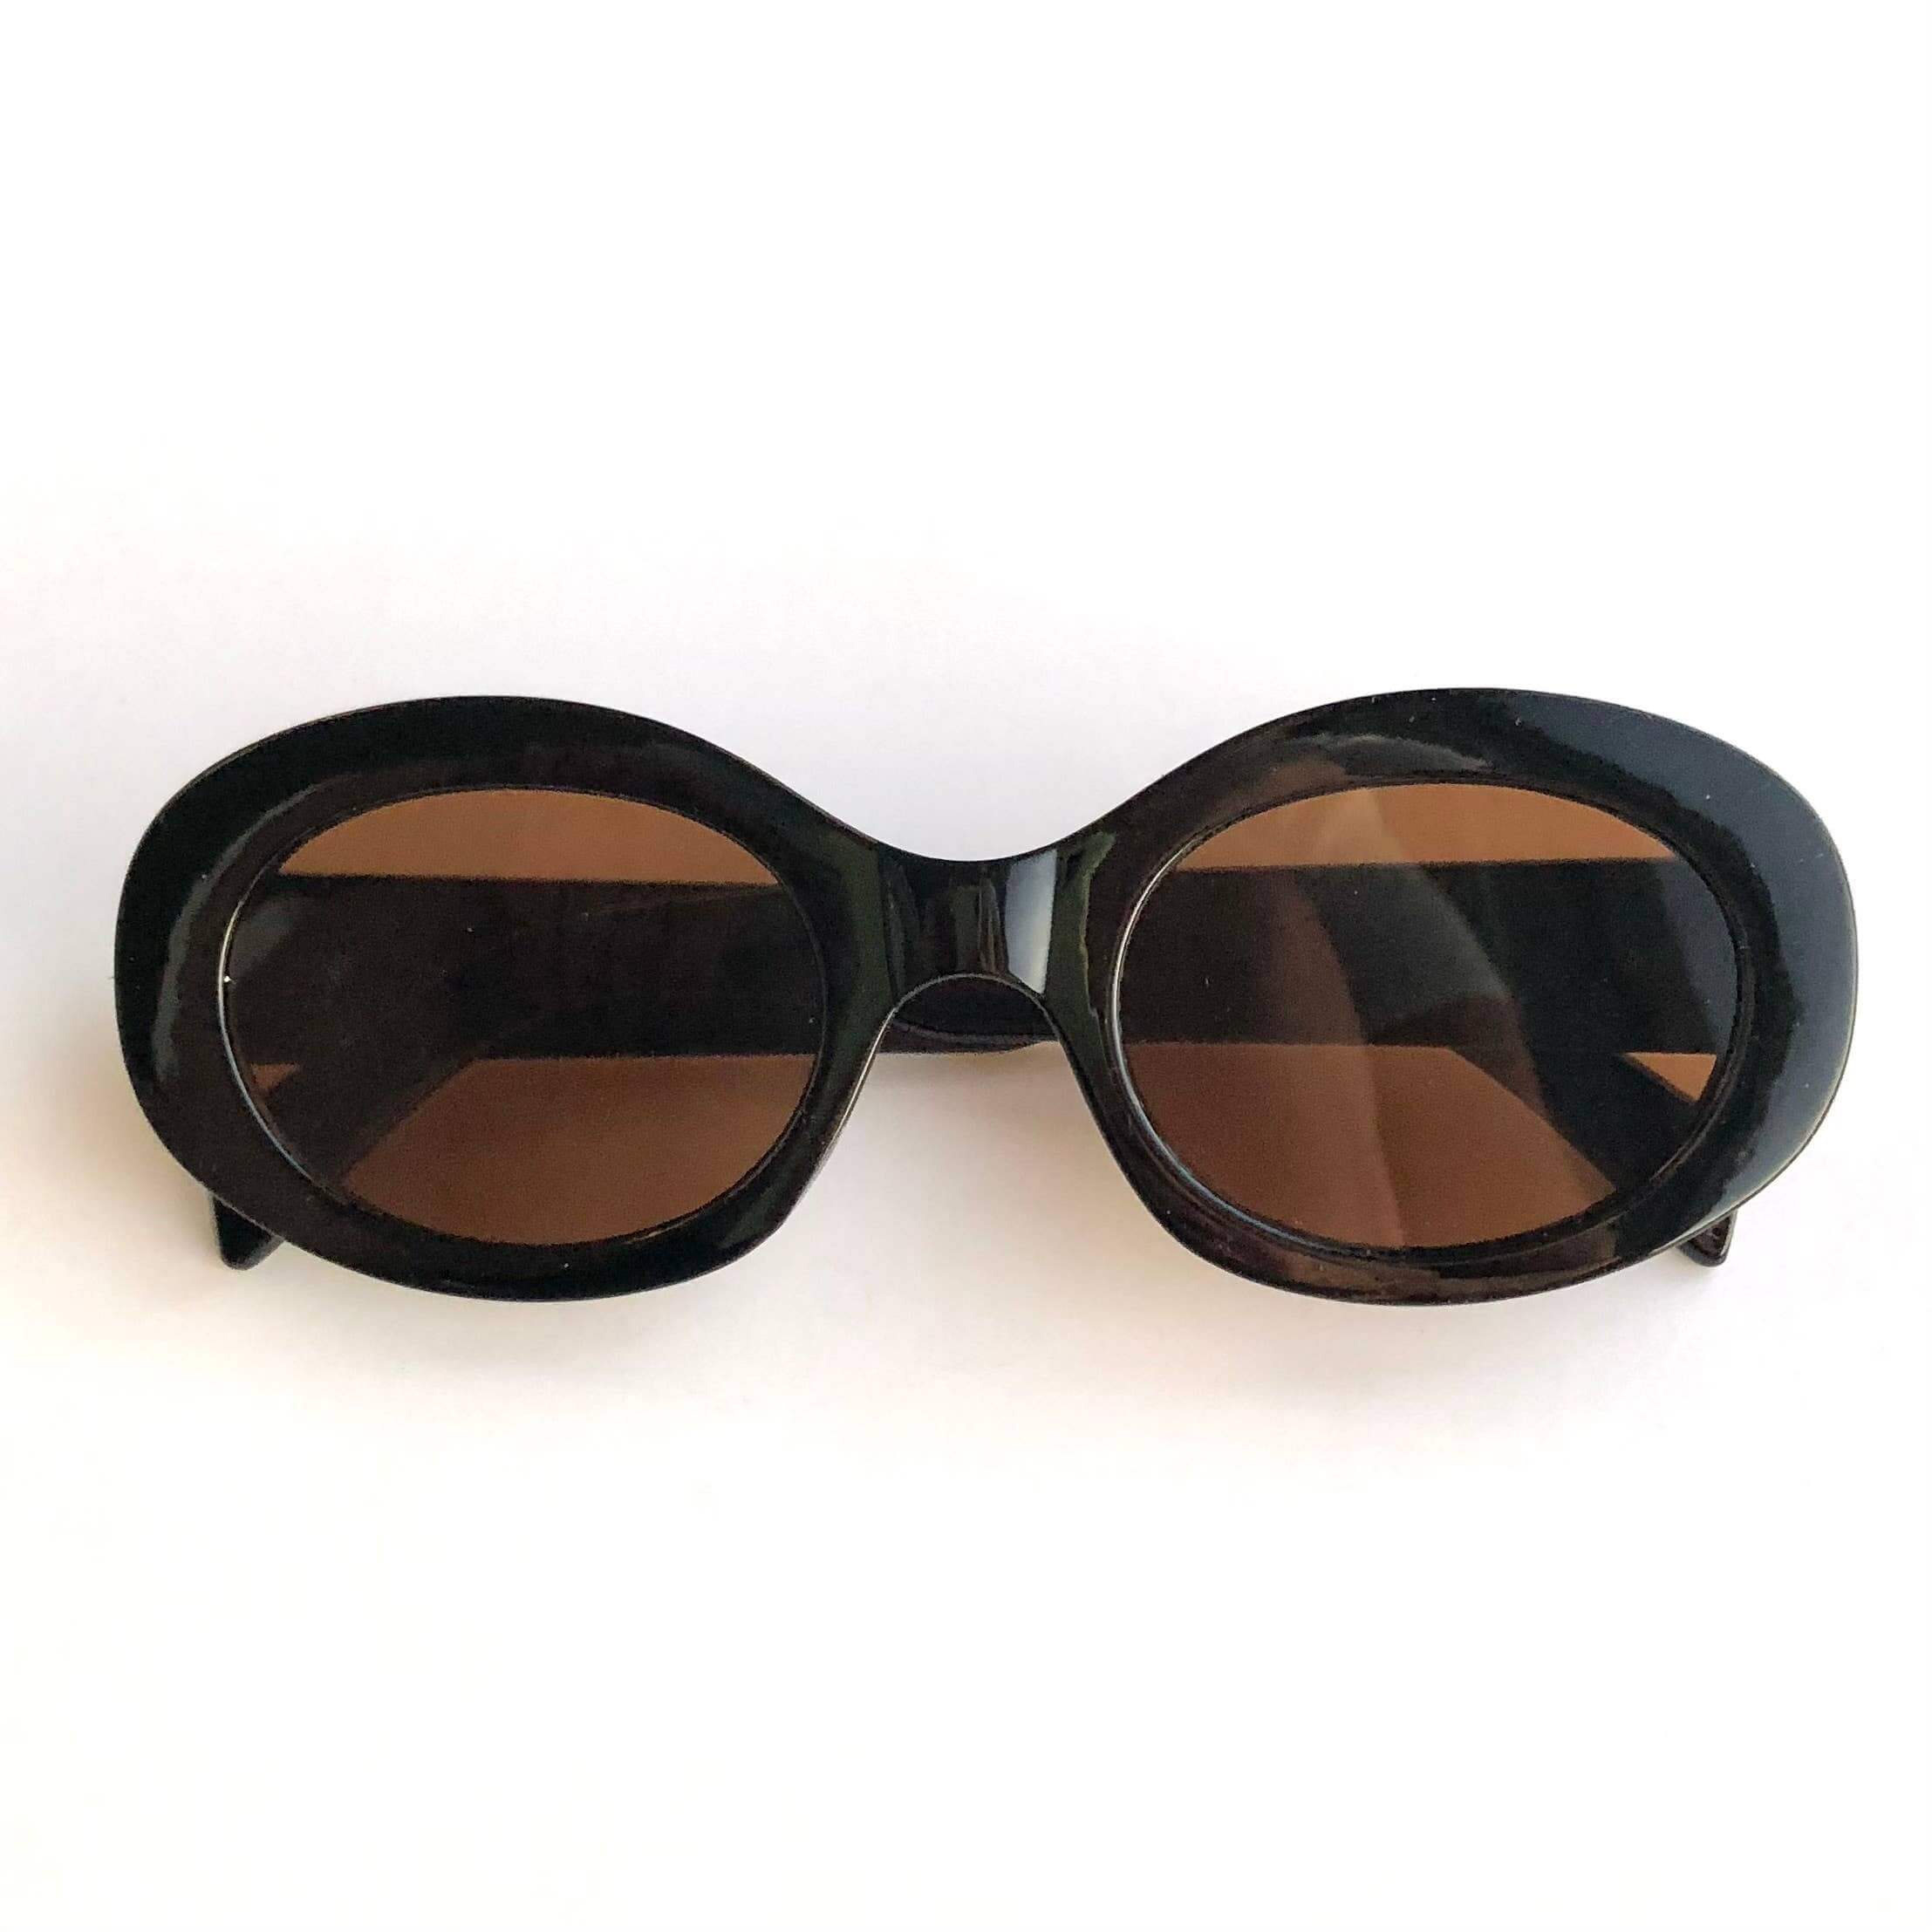 iconic mi Adult Fashion Sunglasses Oval With Gold Accent: Black/brown lense